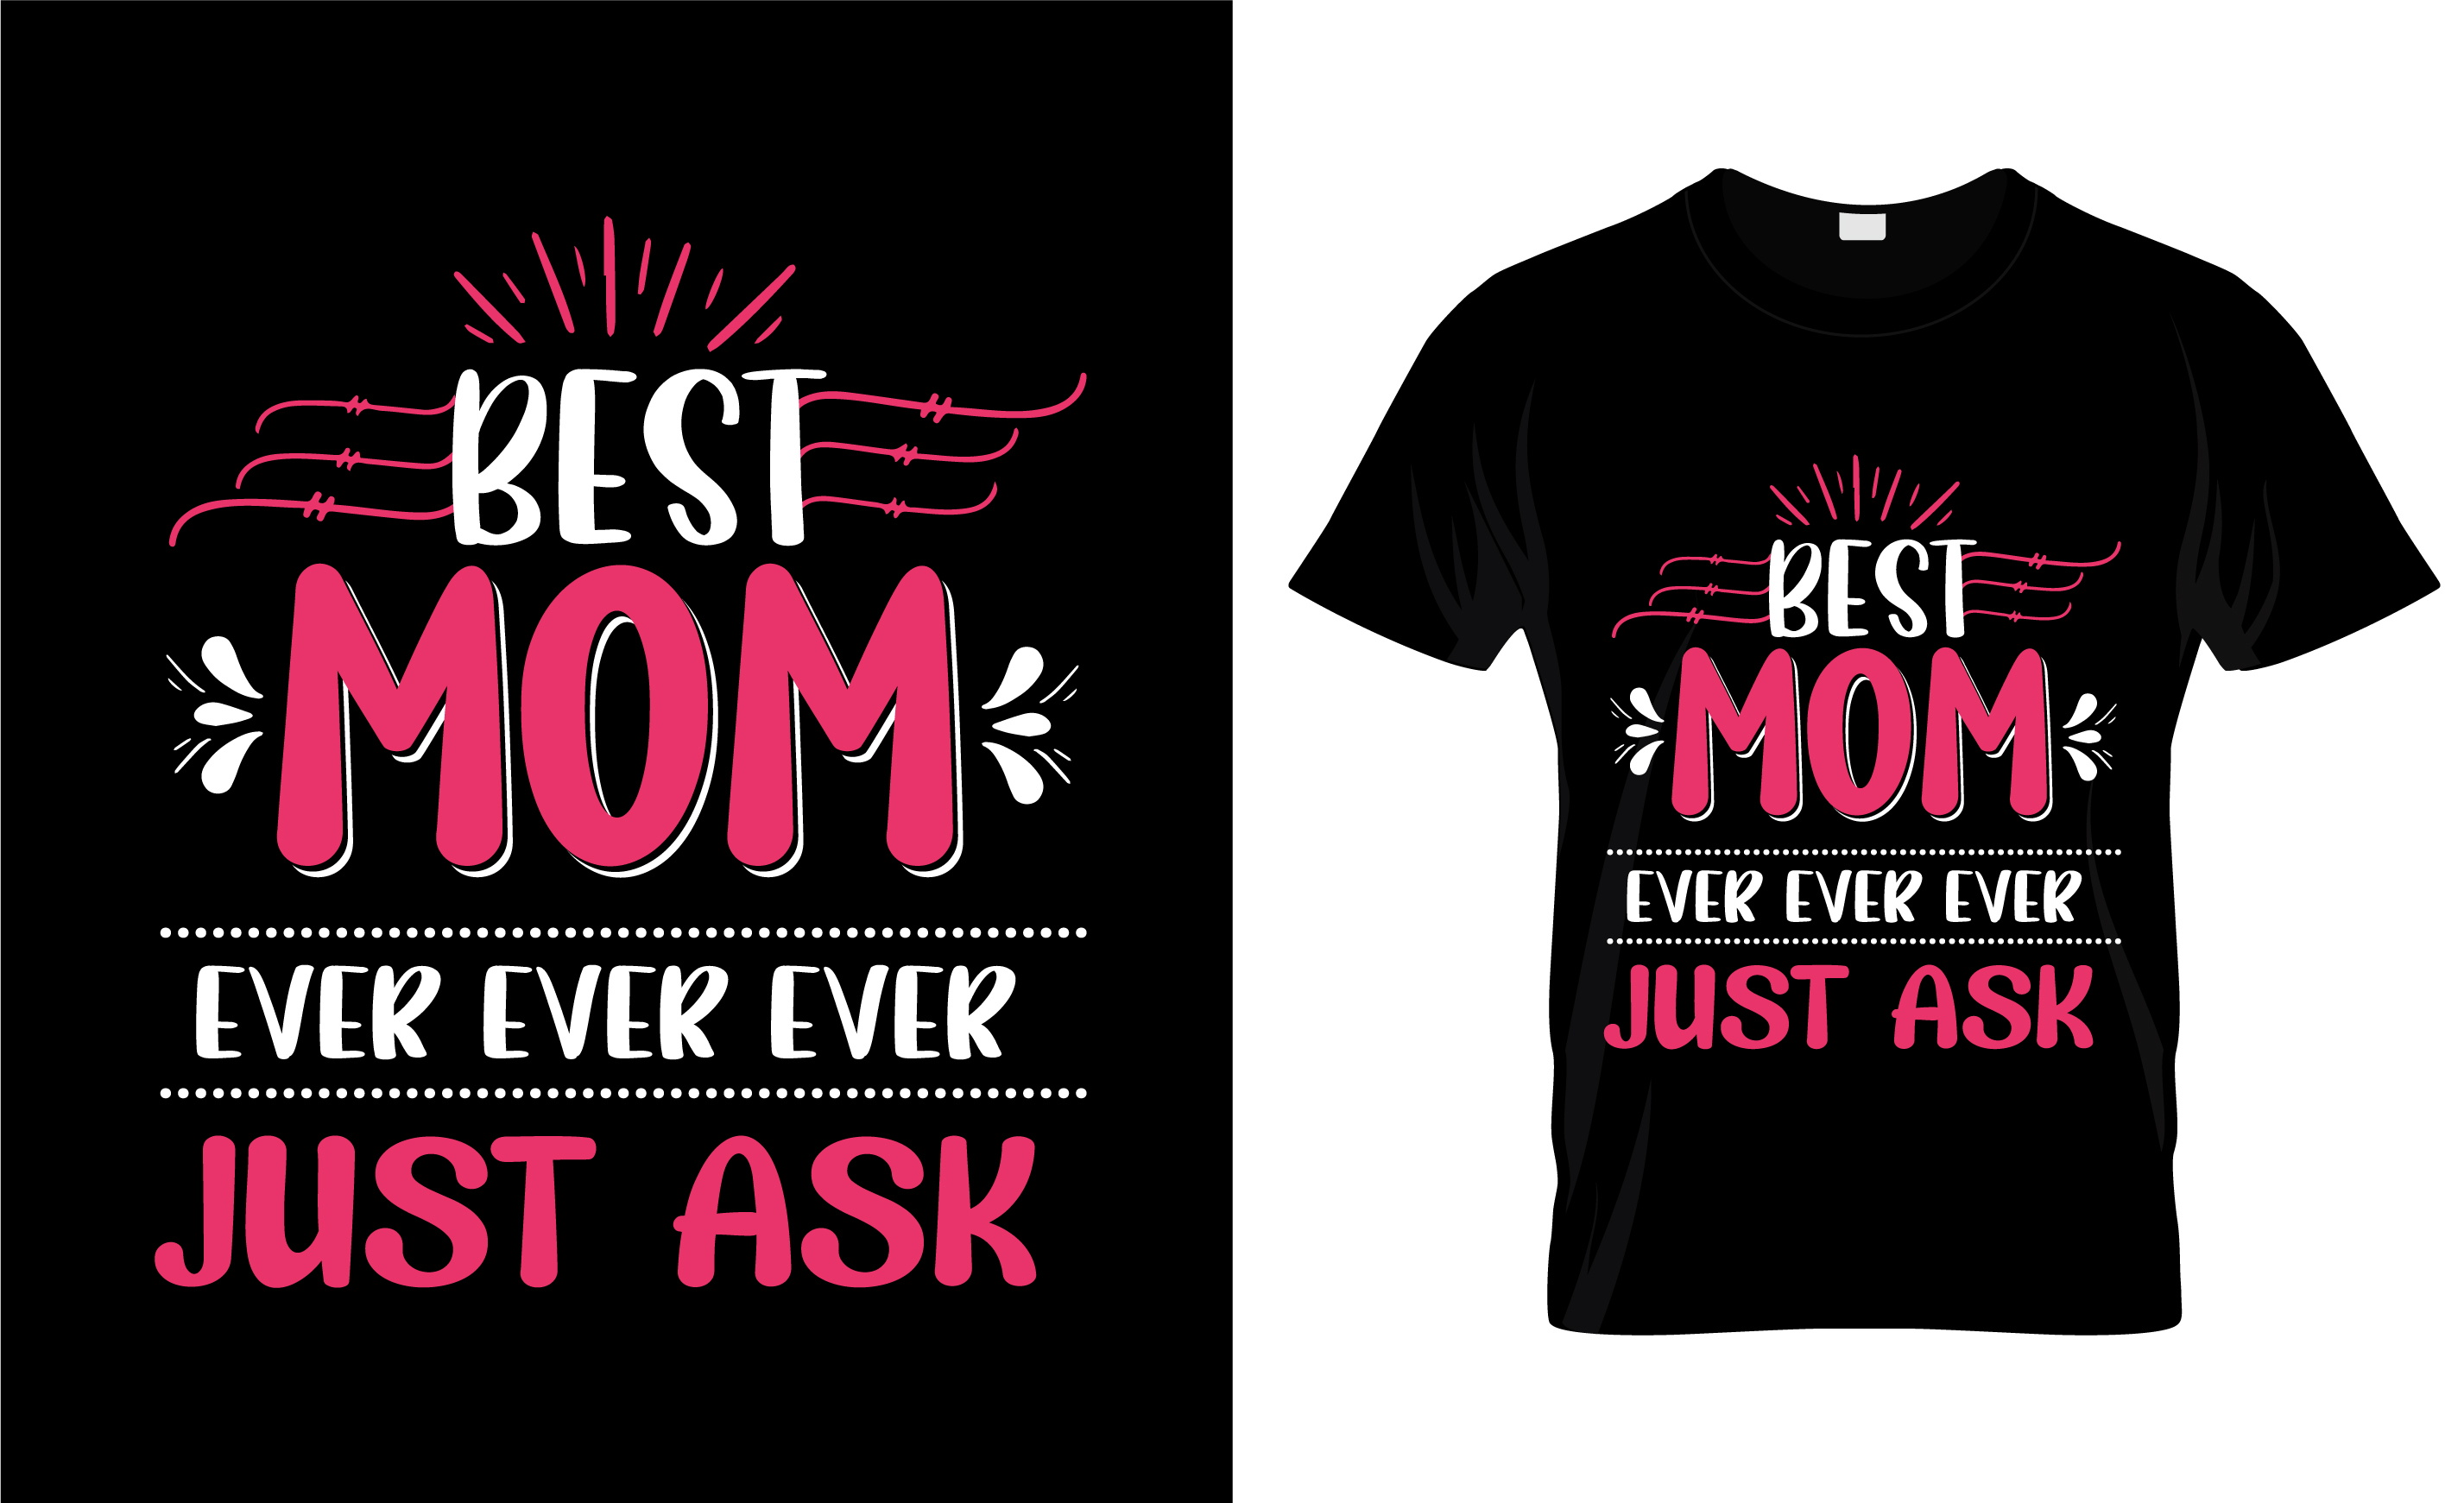 Image of a black t-shirt with an elegant print in red and white about mom.